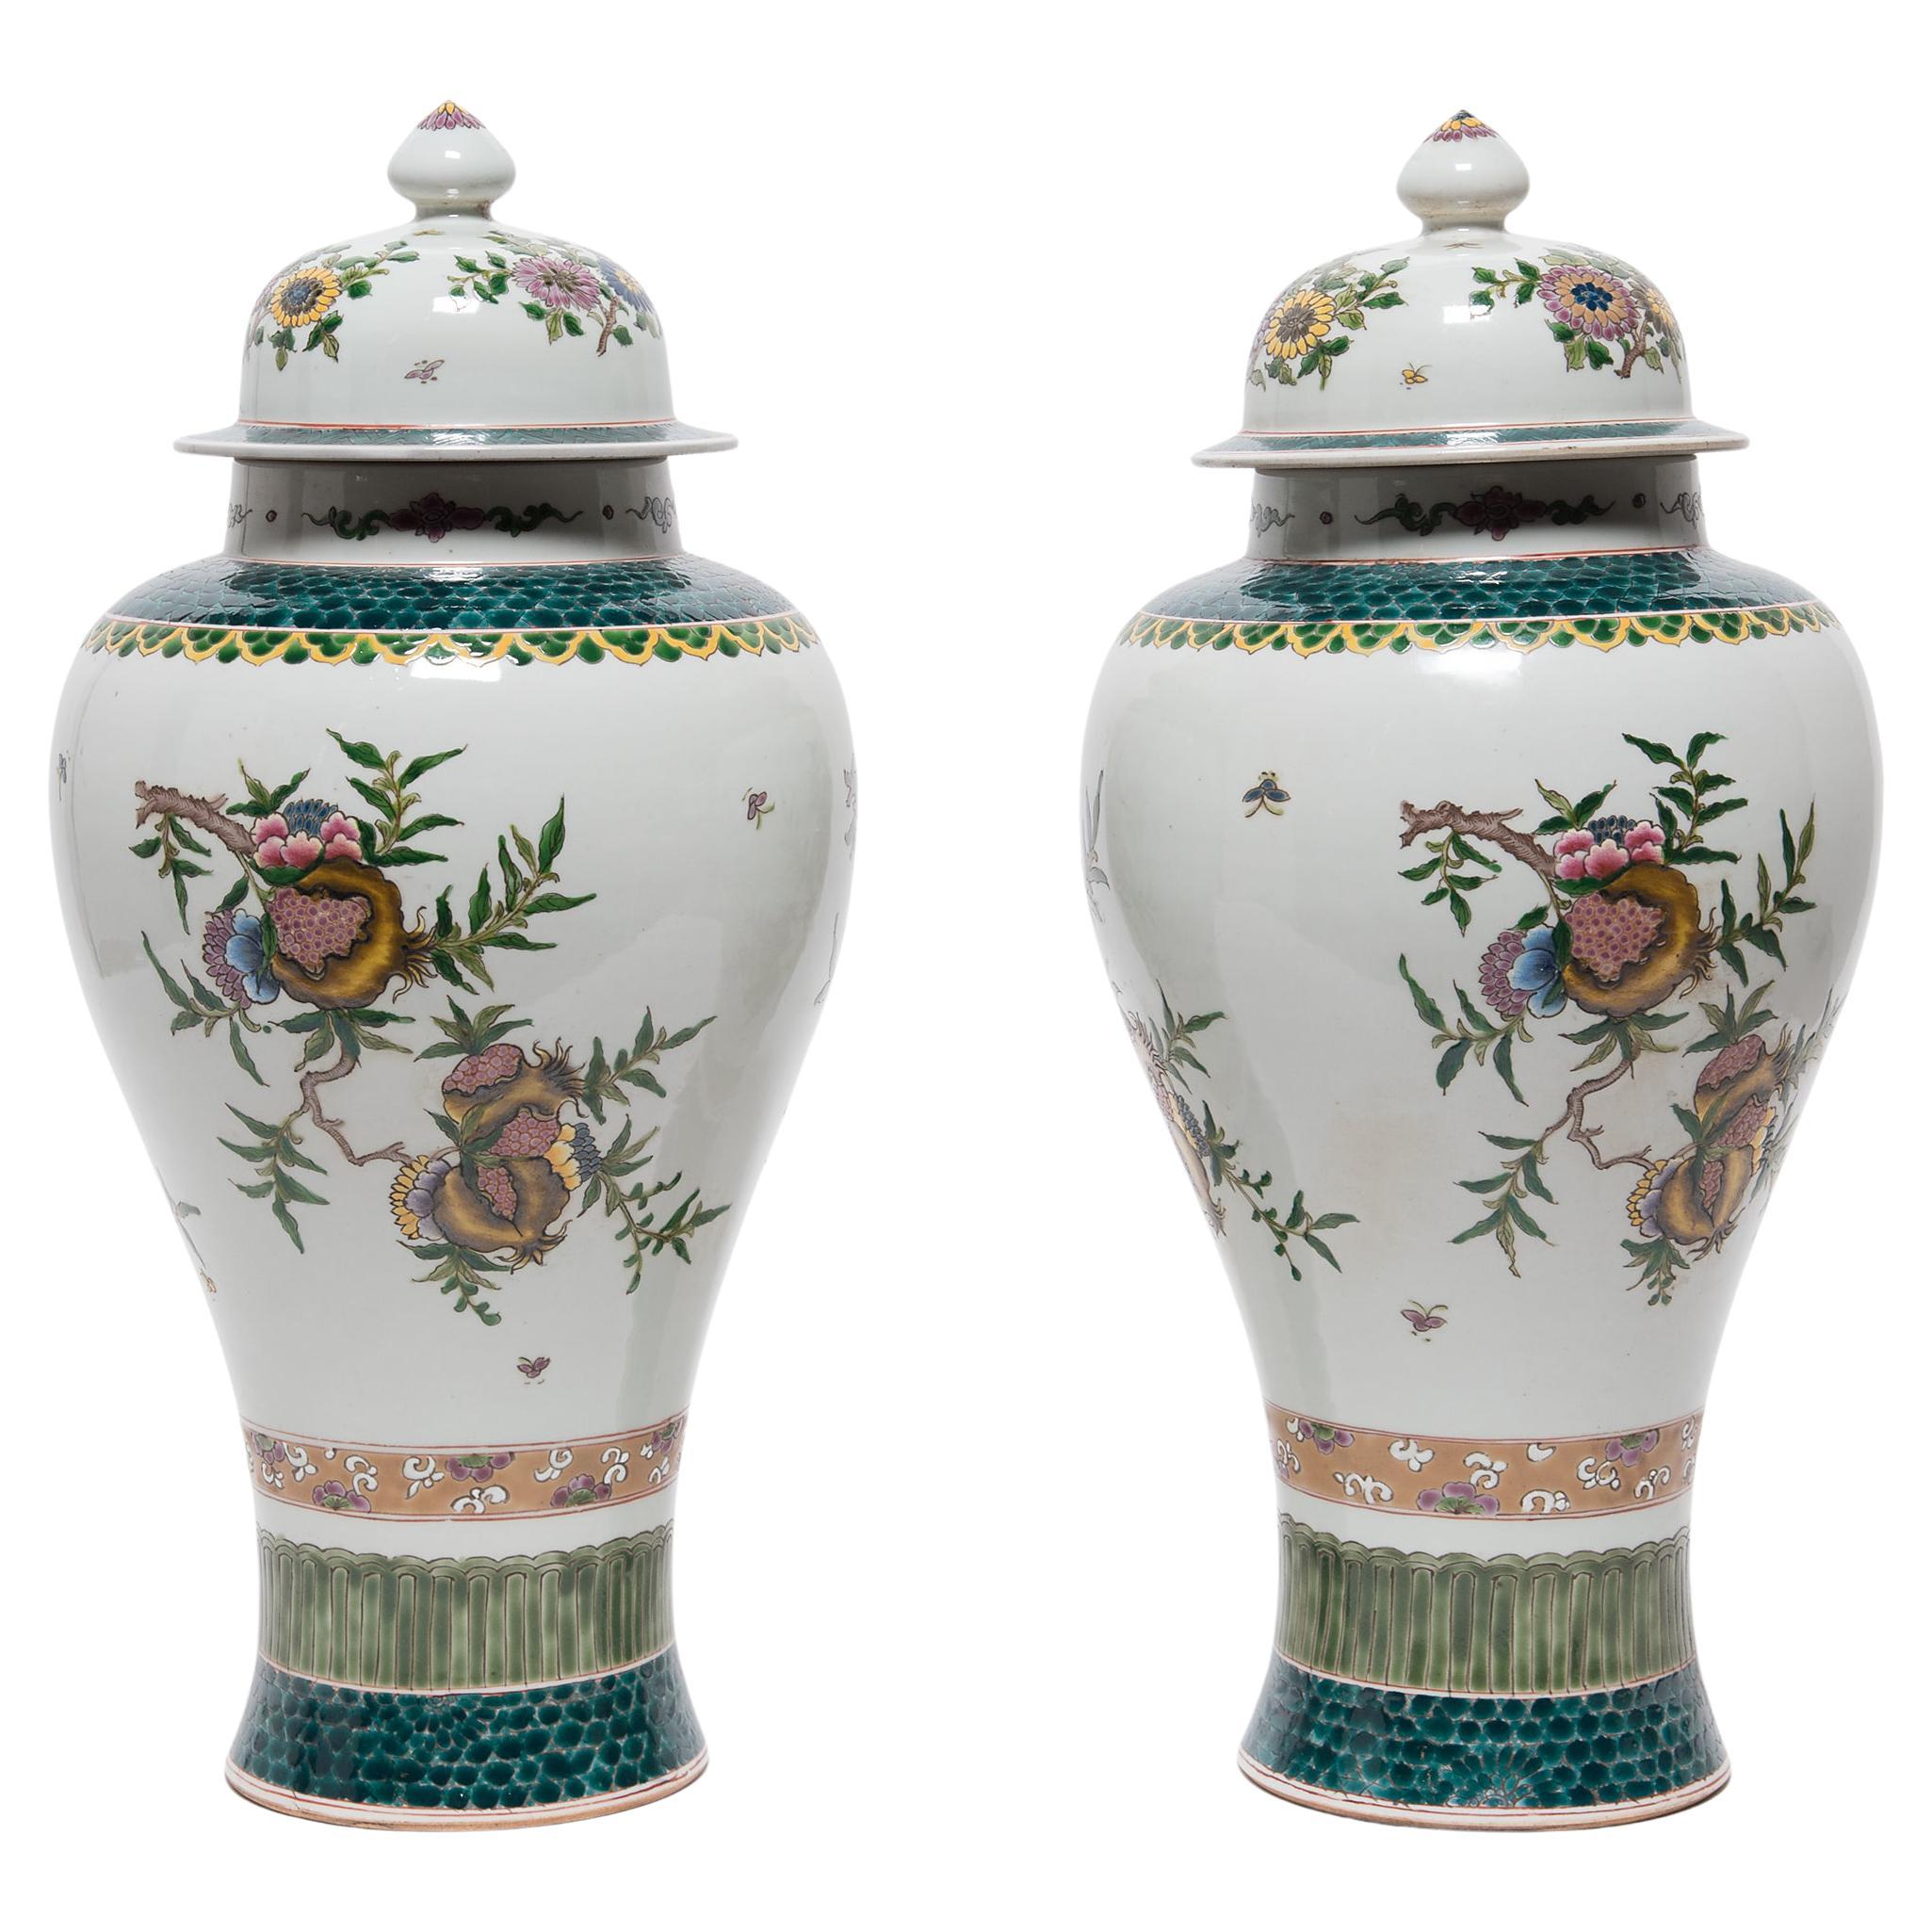 Pair of Chinese Famille Verte Baluster Jars with Pomegranates, c. 1900